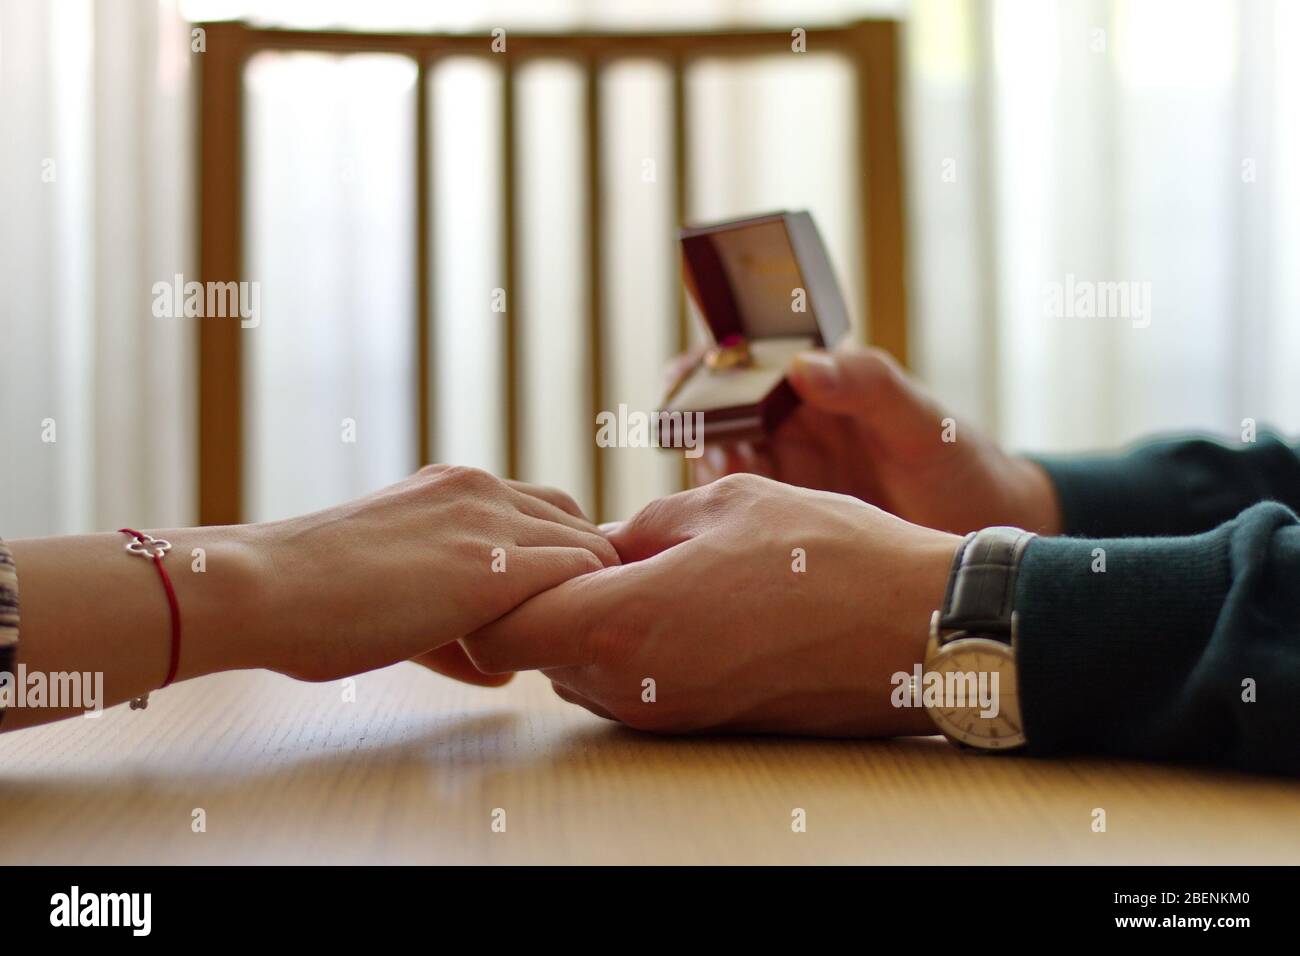 Closeup of man holding engagement ring and woman's hand Stock Photo